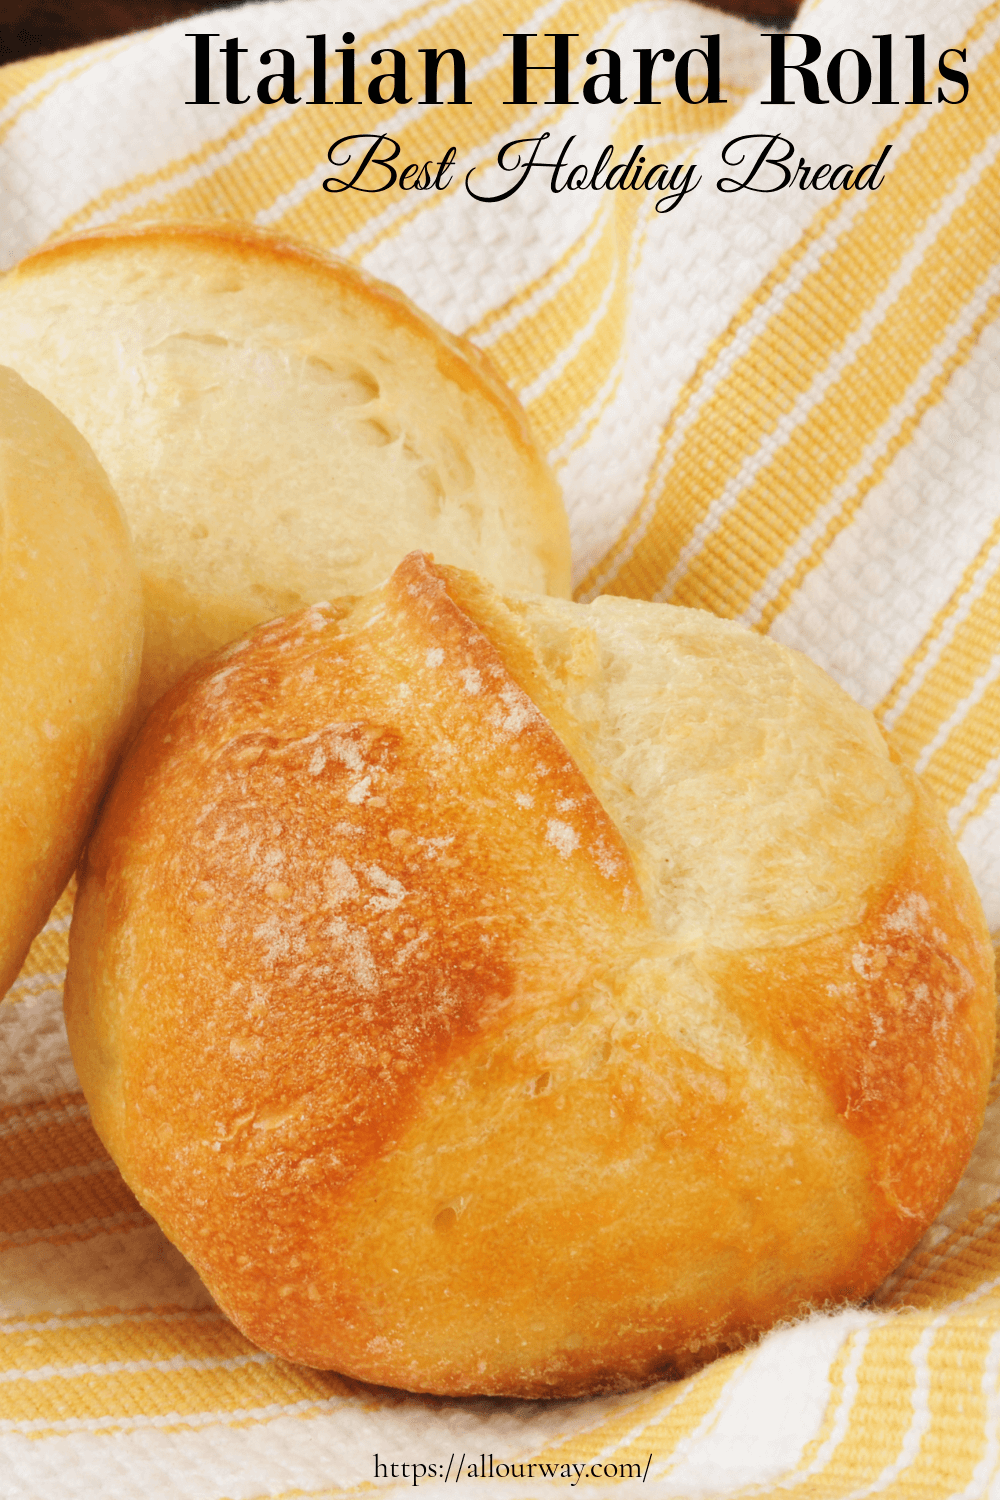 A light airy roll with a crunchy crackly crust. Does not use a lot of yeast, instead it relies on extra-long fermentation for flavor development. It's the perfect dinner roll to serve at a holiday meal. Not sweet, just plenty of rich bread flavor. #dinnerrolls, #hardrolls, #Italianhardrolls, #crustyrolls, #holidaybuns, #yeastbuns, #yeastrolls